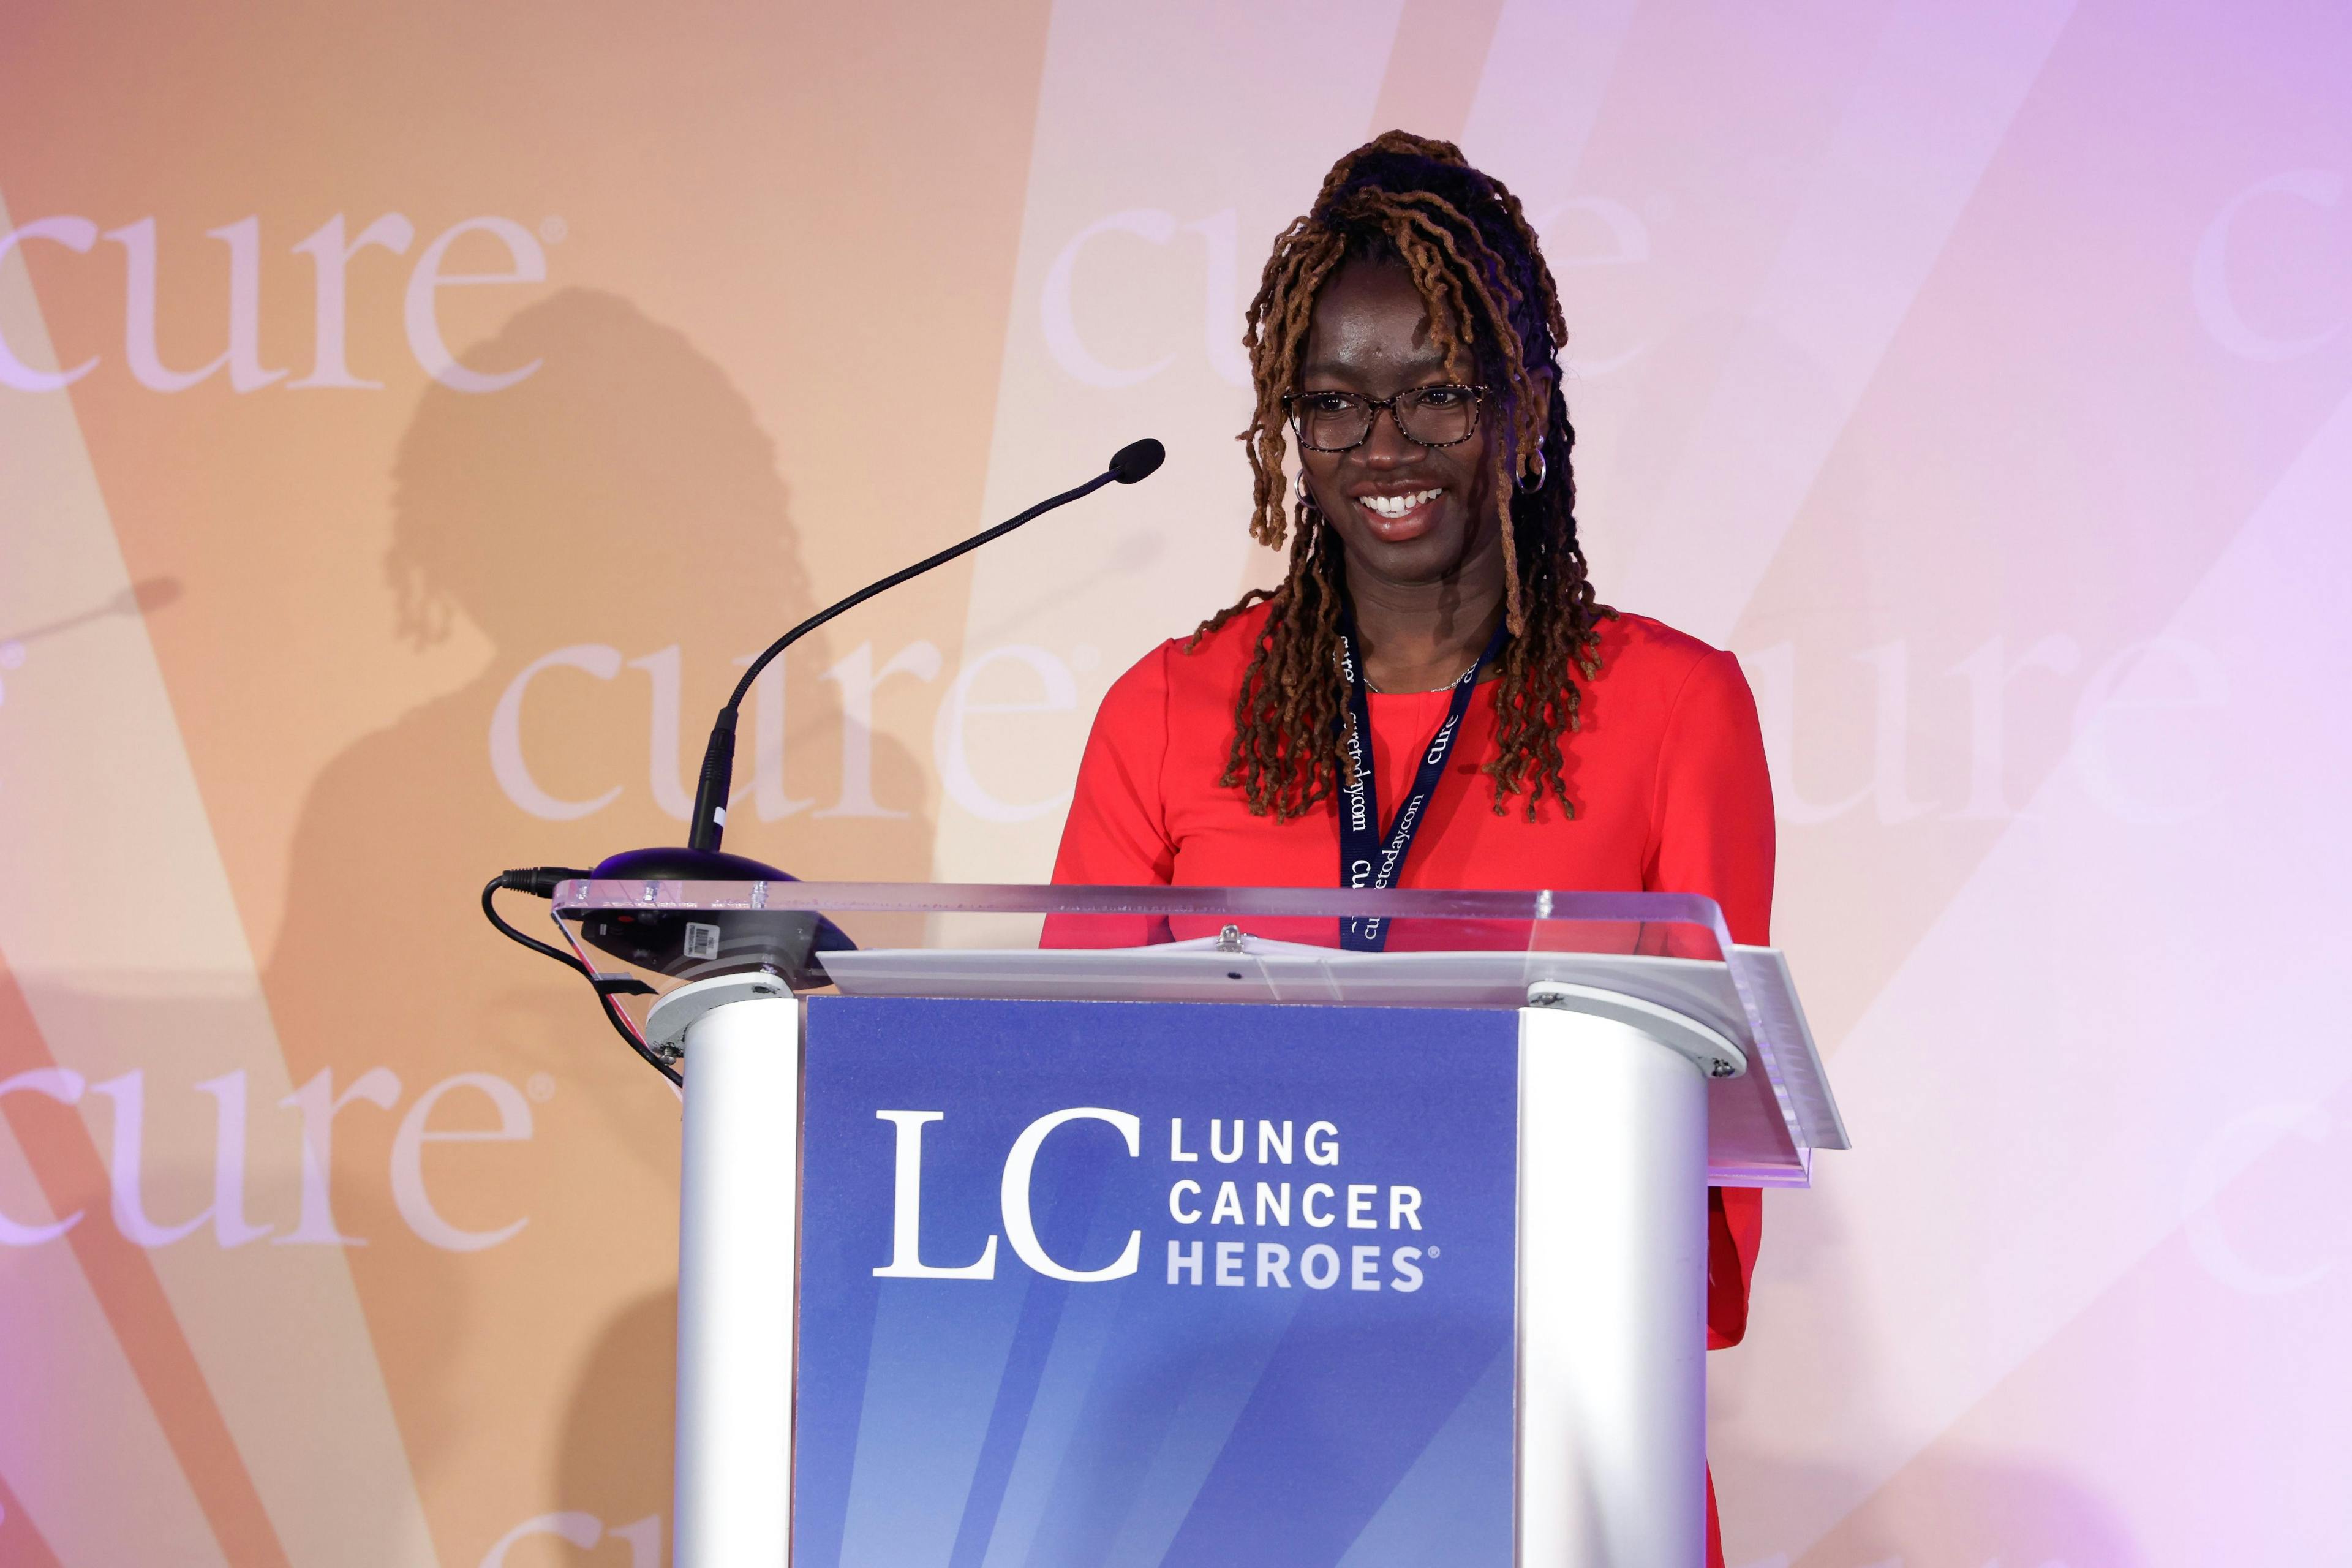 Alesha Arnold at CURE®’s third annual Lung Cancer Heroes® awards program.